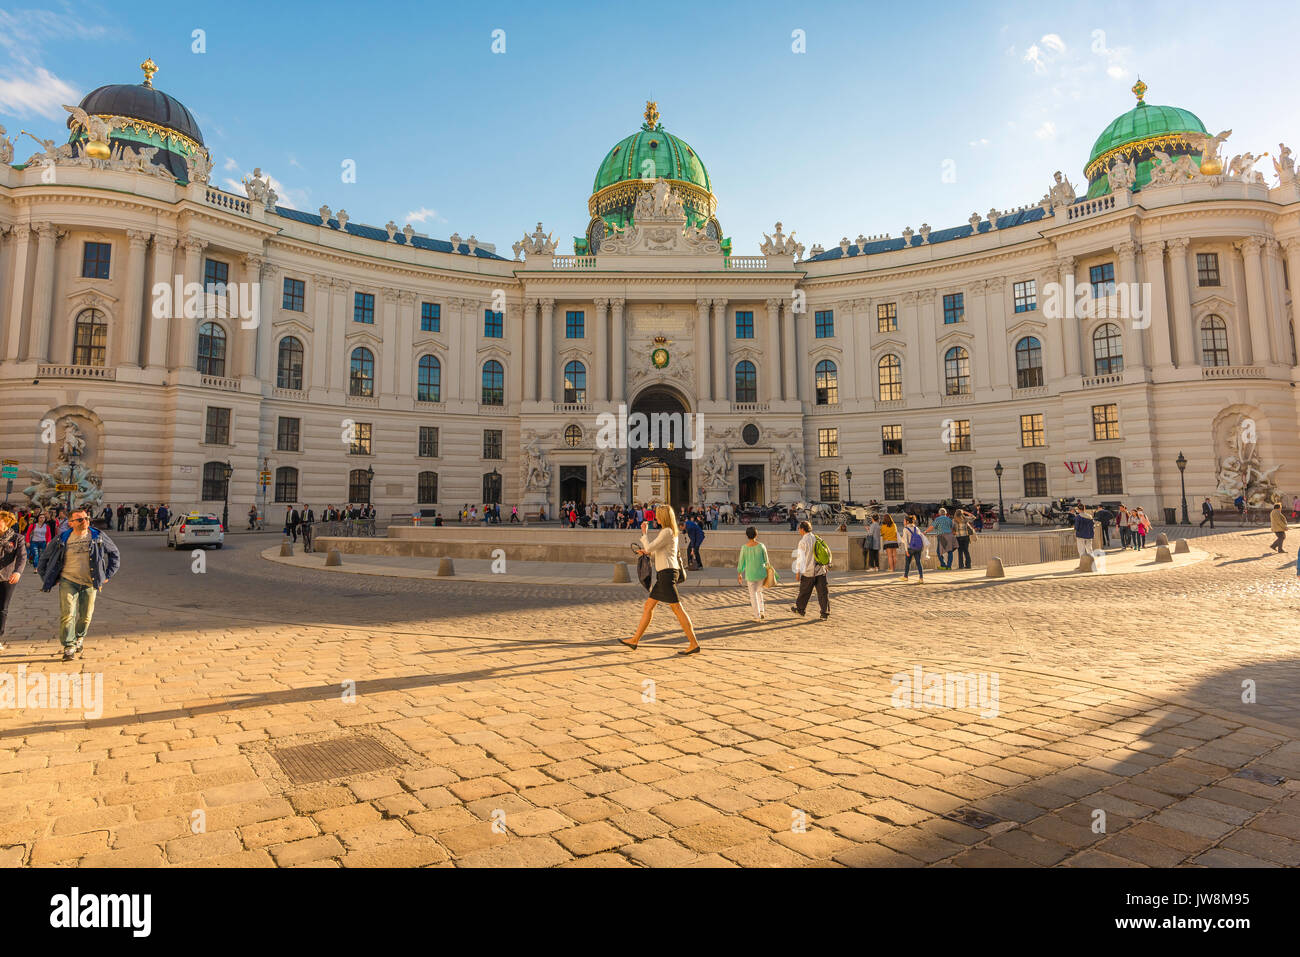 Vienna Hofburg palace, view of the historic Michaelerplatz entrance to the Hofburg palace complex in Vienna, Wien, Austria. Stock Photo